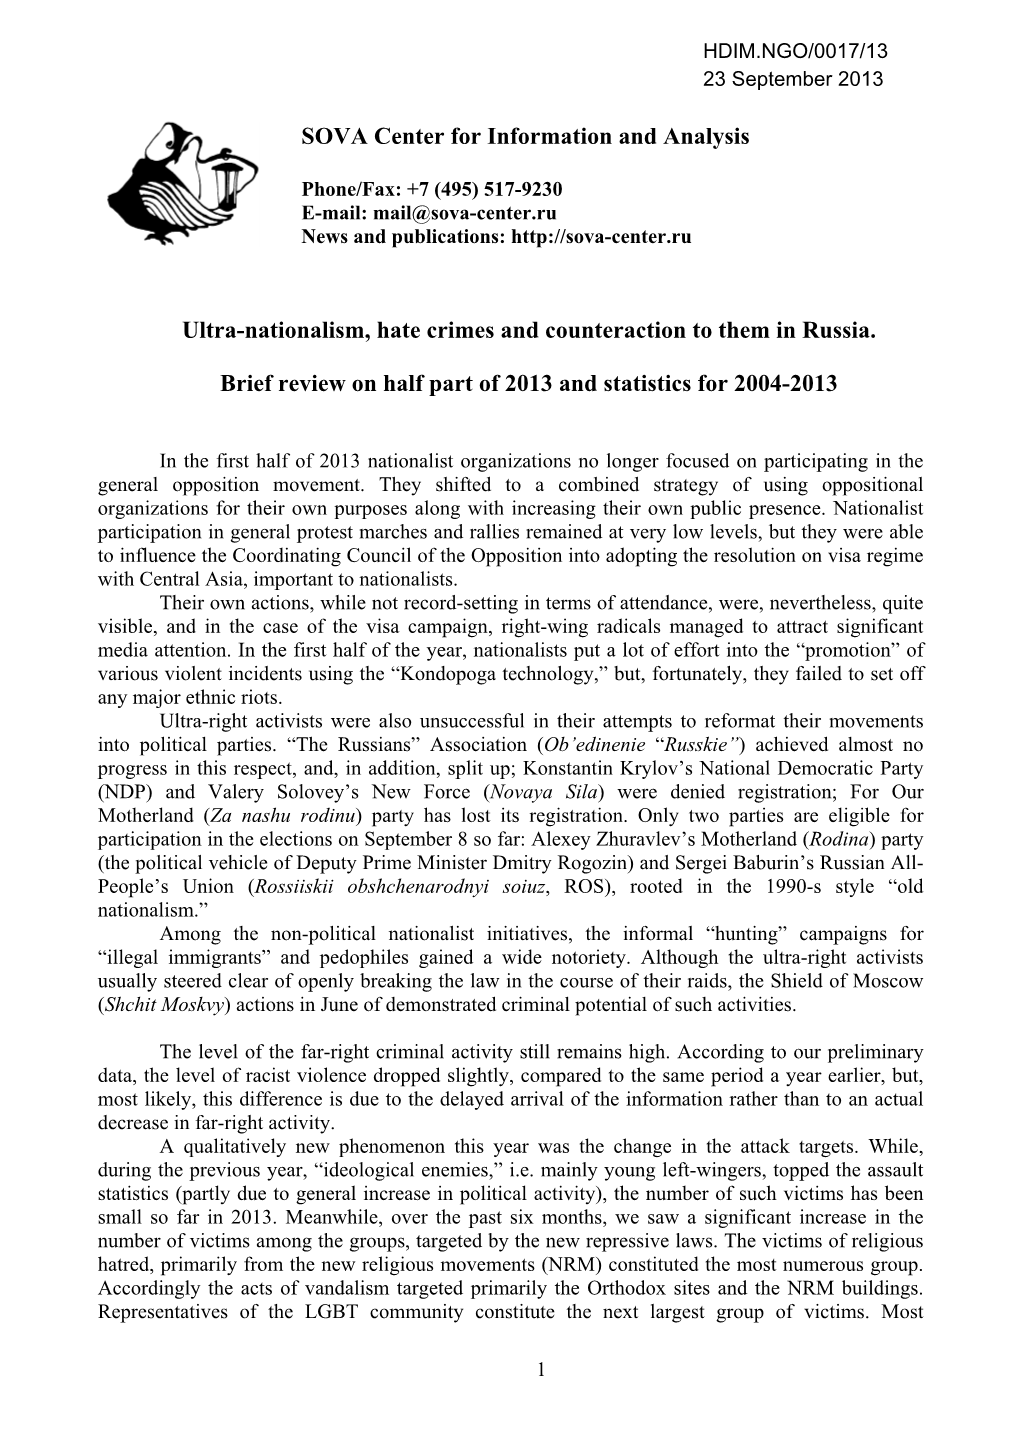 SOVA Center for Information and Analysis Ultra-Nationalism, Hate Crimes and Counteraction to Them in Russia. Brief Review On